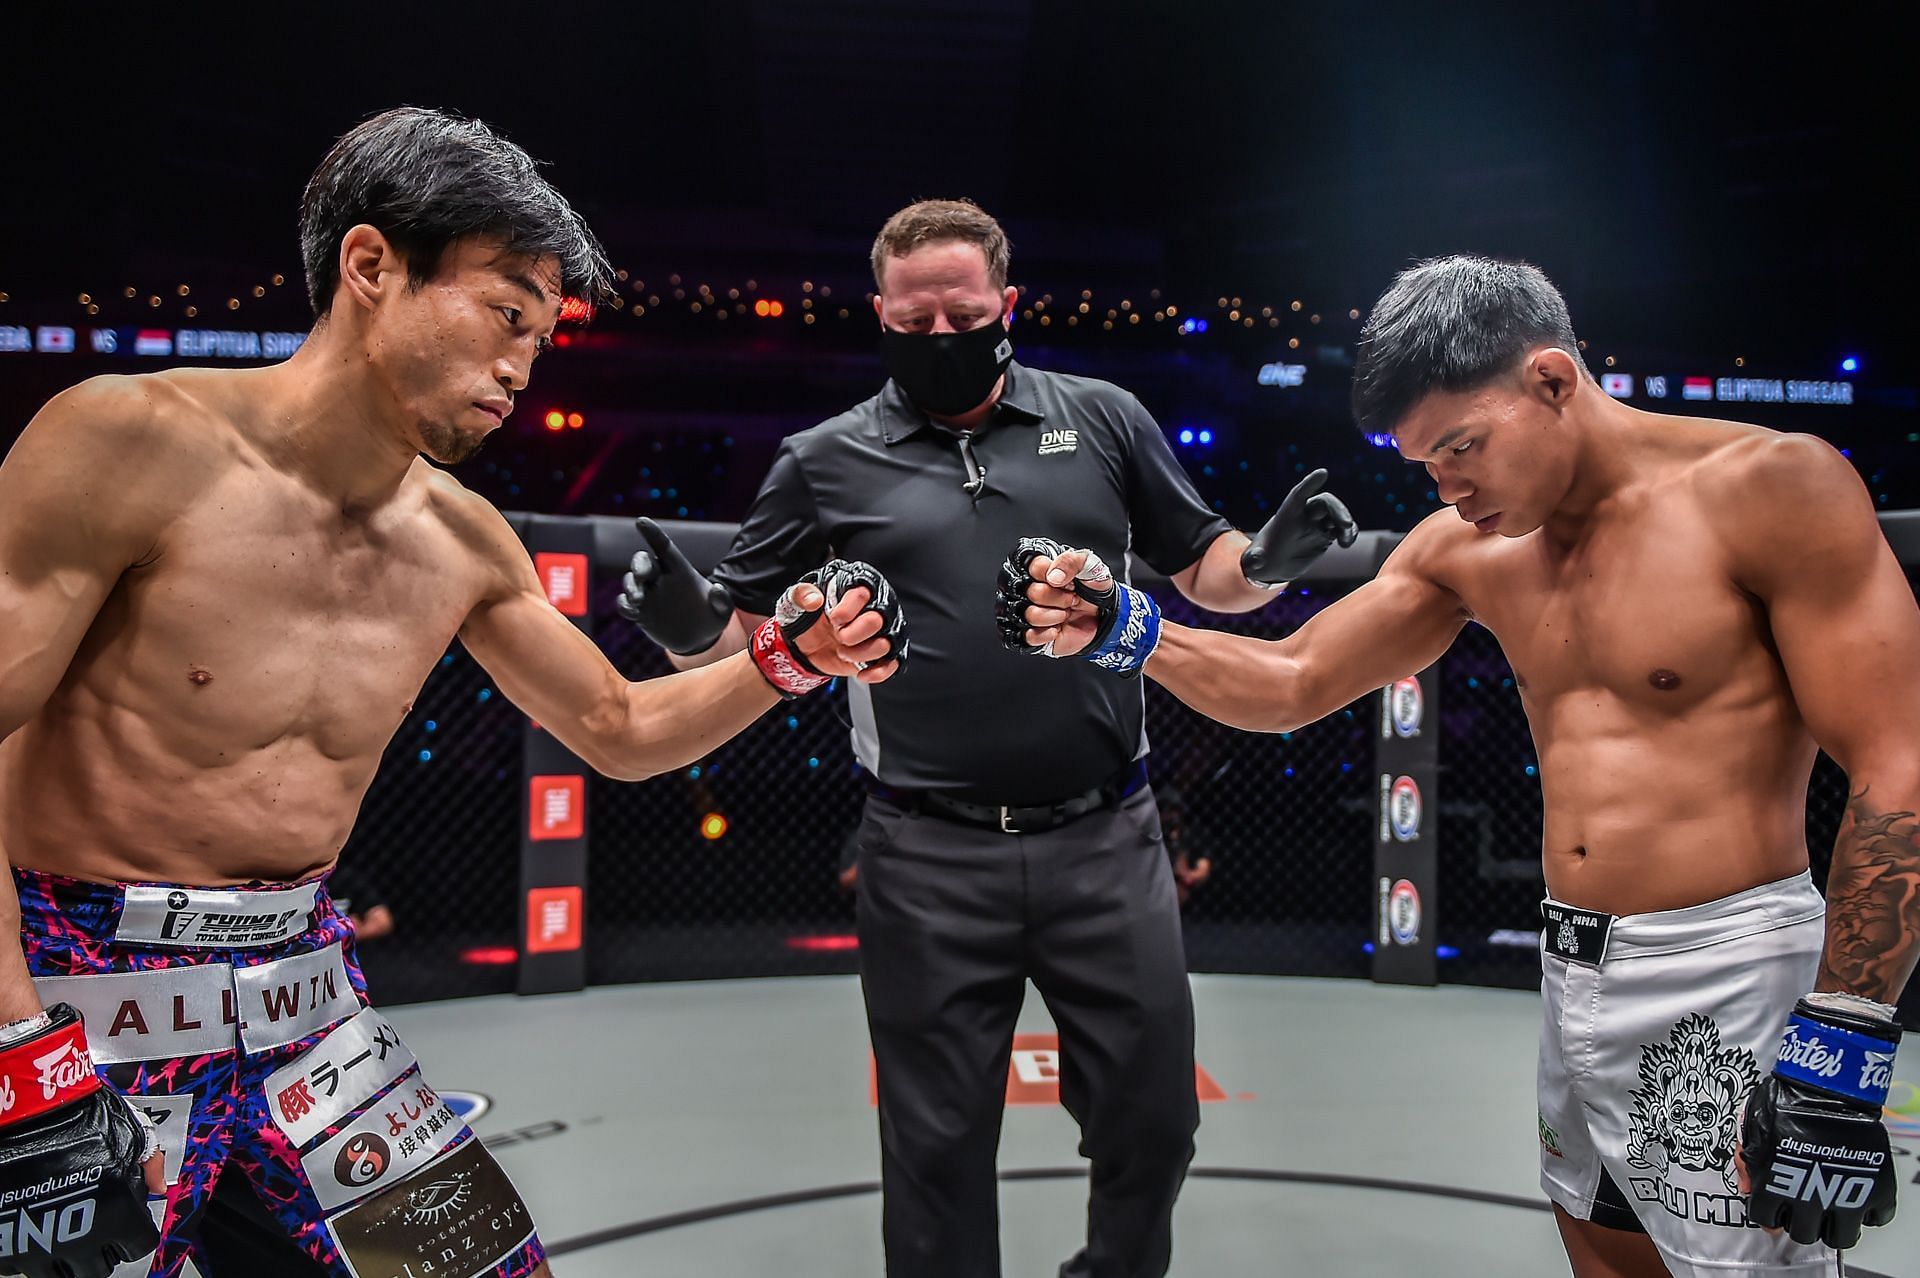 Elipitua Siregar vows to bounce back after his loss against Senzo Ikeda | Photo: ONE Championship